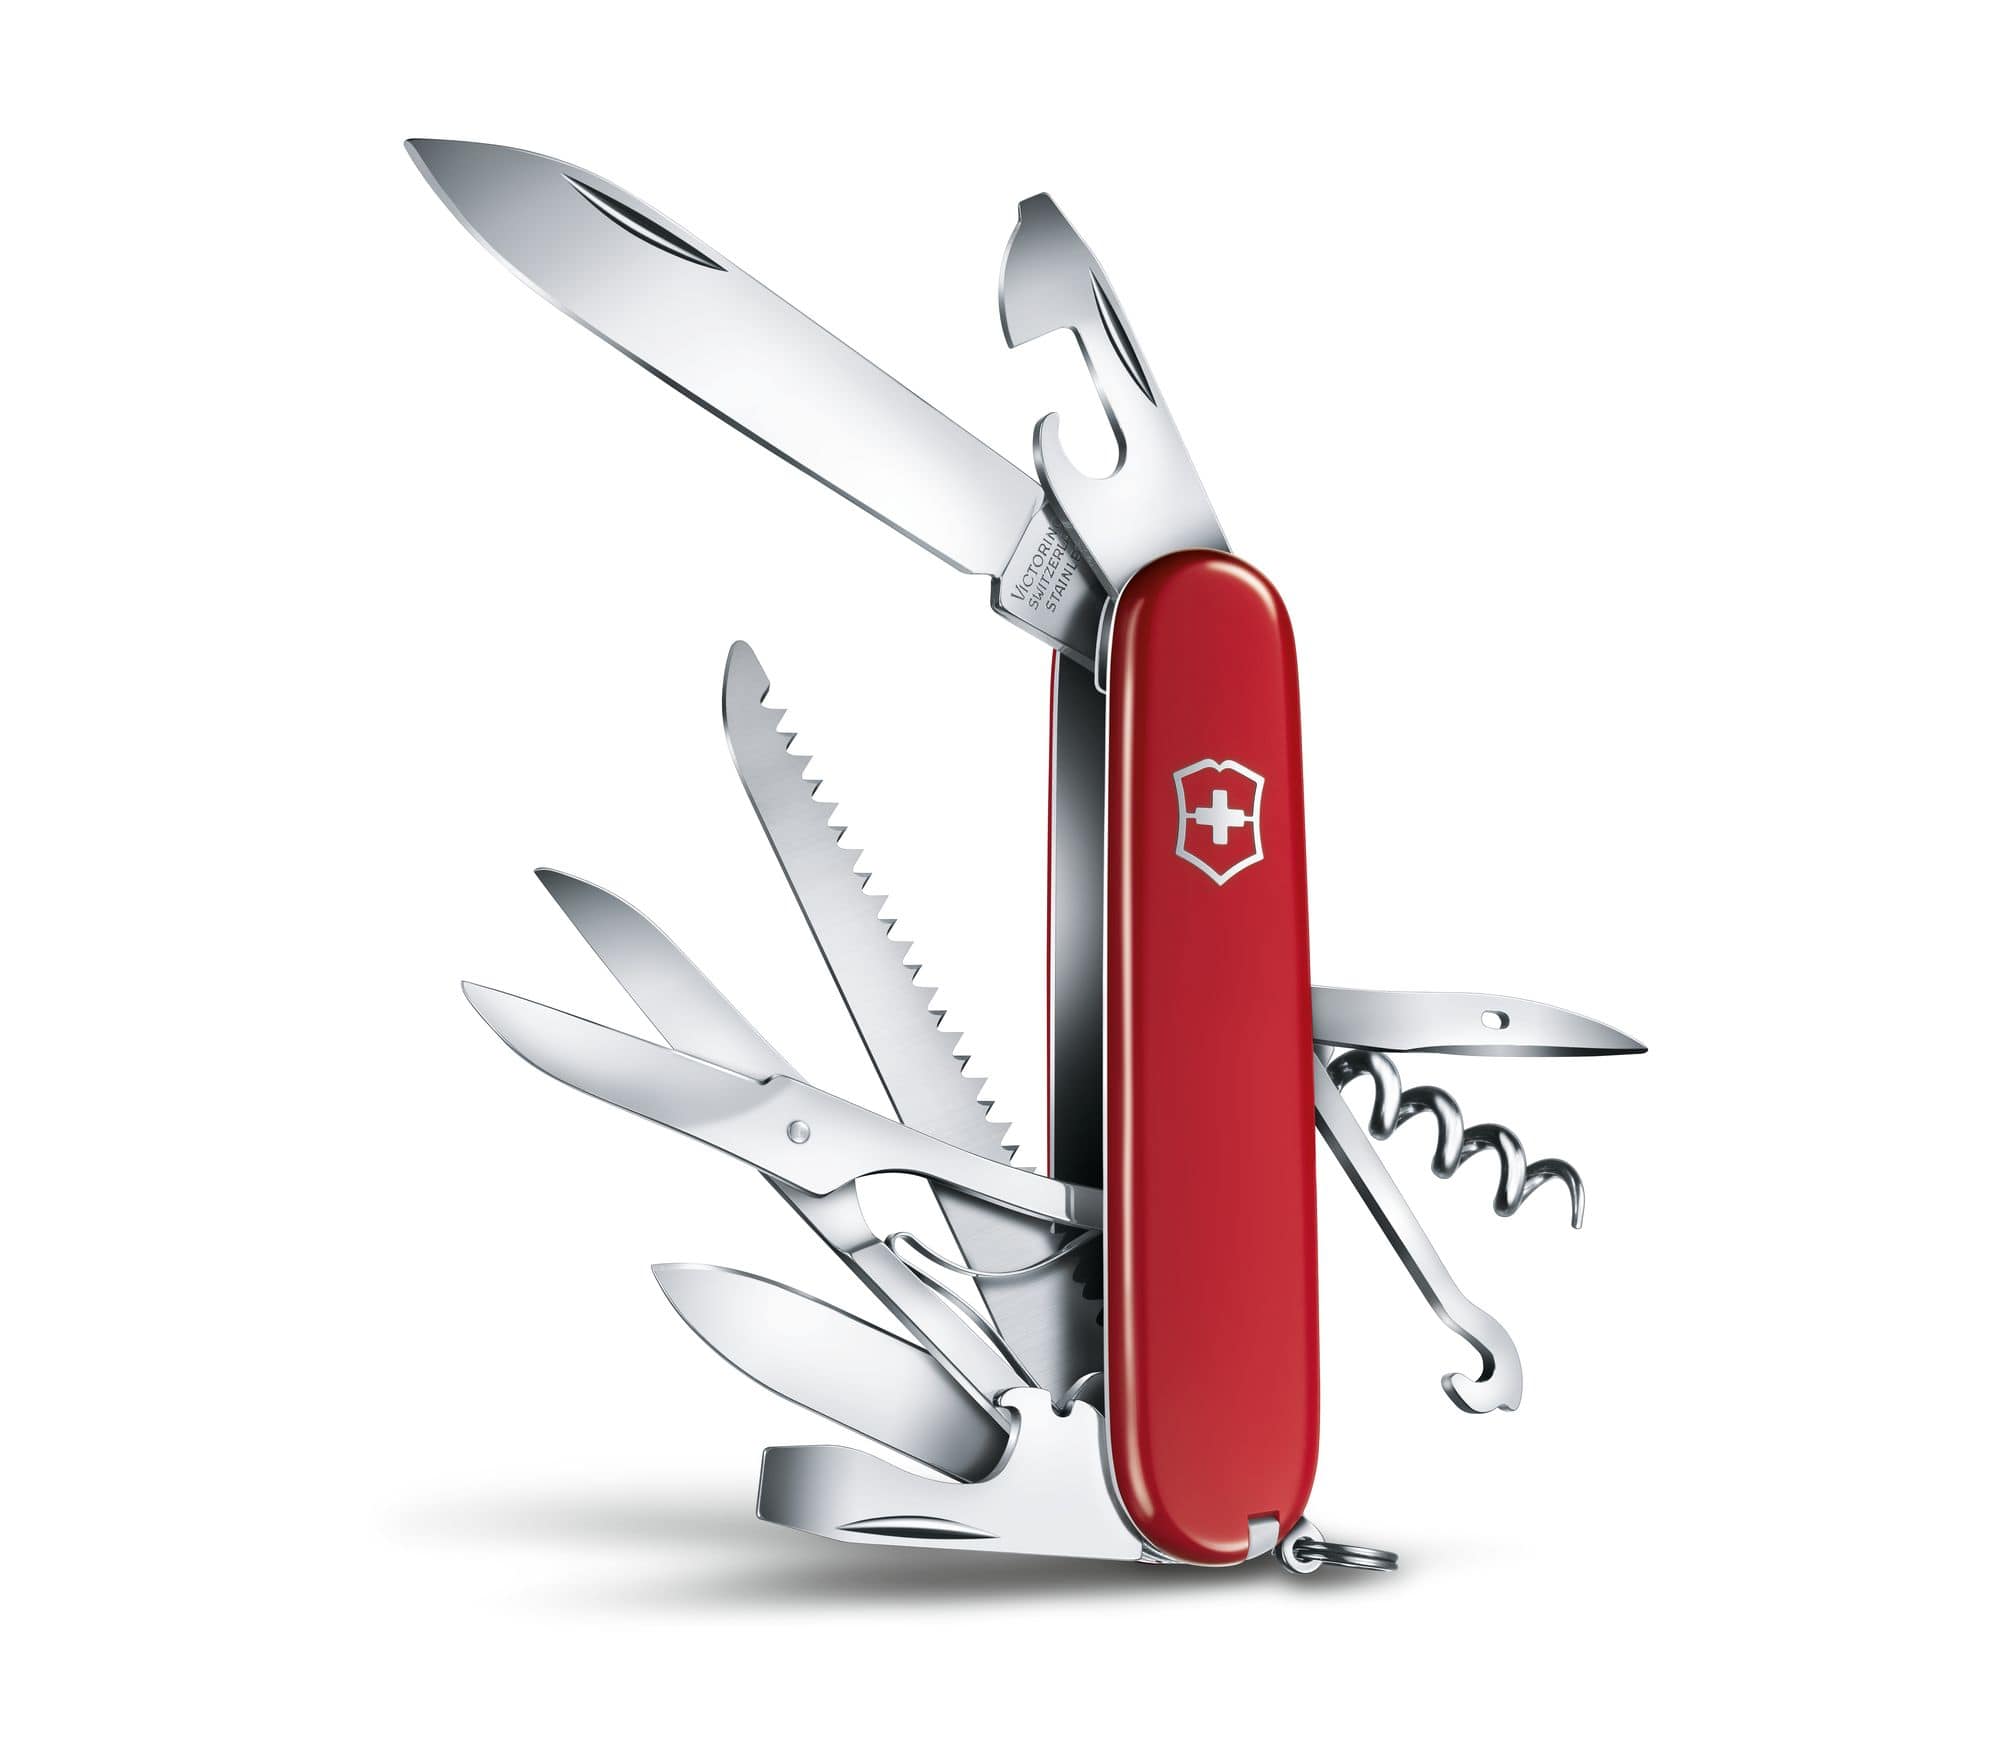 Victorinox Swiss Army Knife Huntsman 91mm Red With 15 Functions - 1.3713/B1